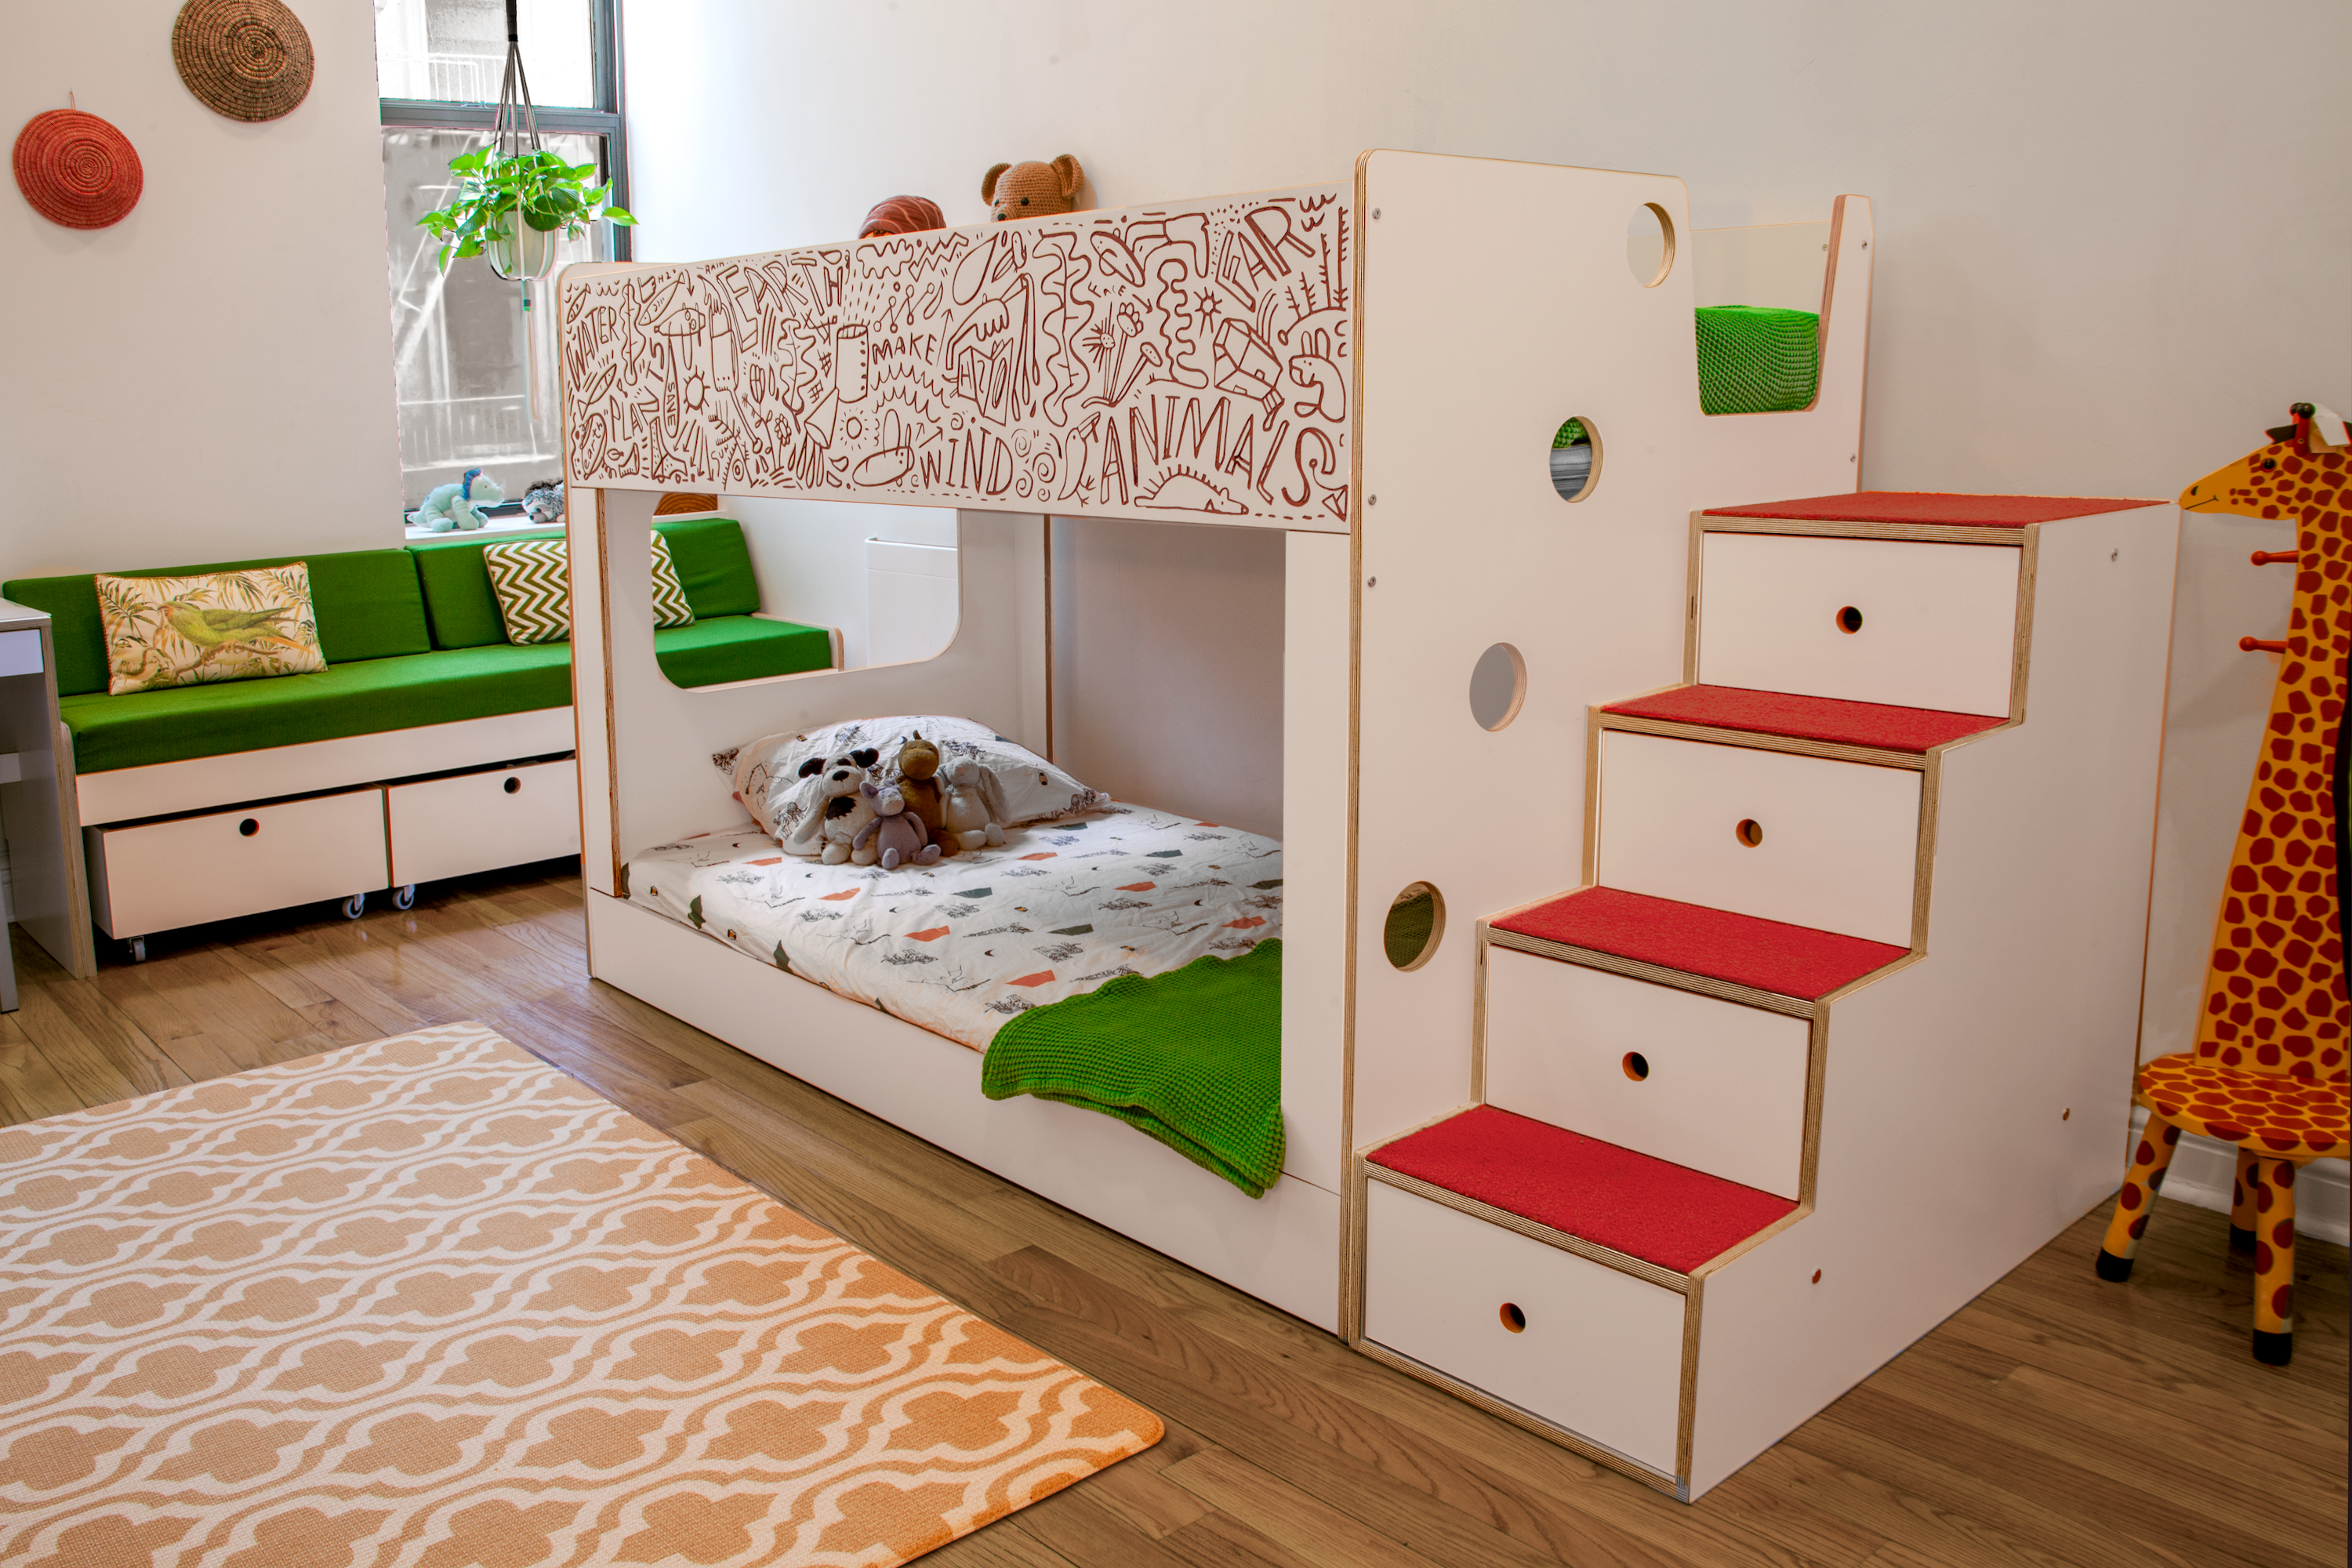 Colorful child's room with a white patterned bunk bed, green and red accents, and an orange rug.